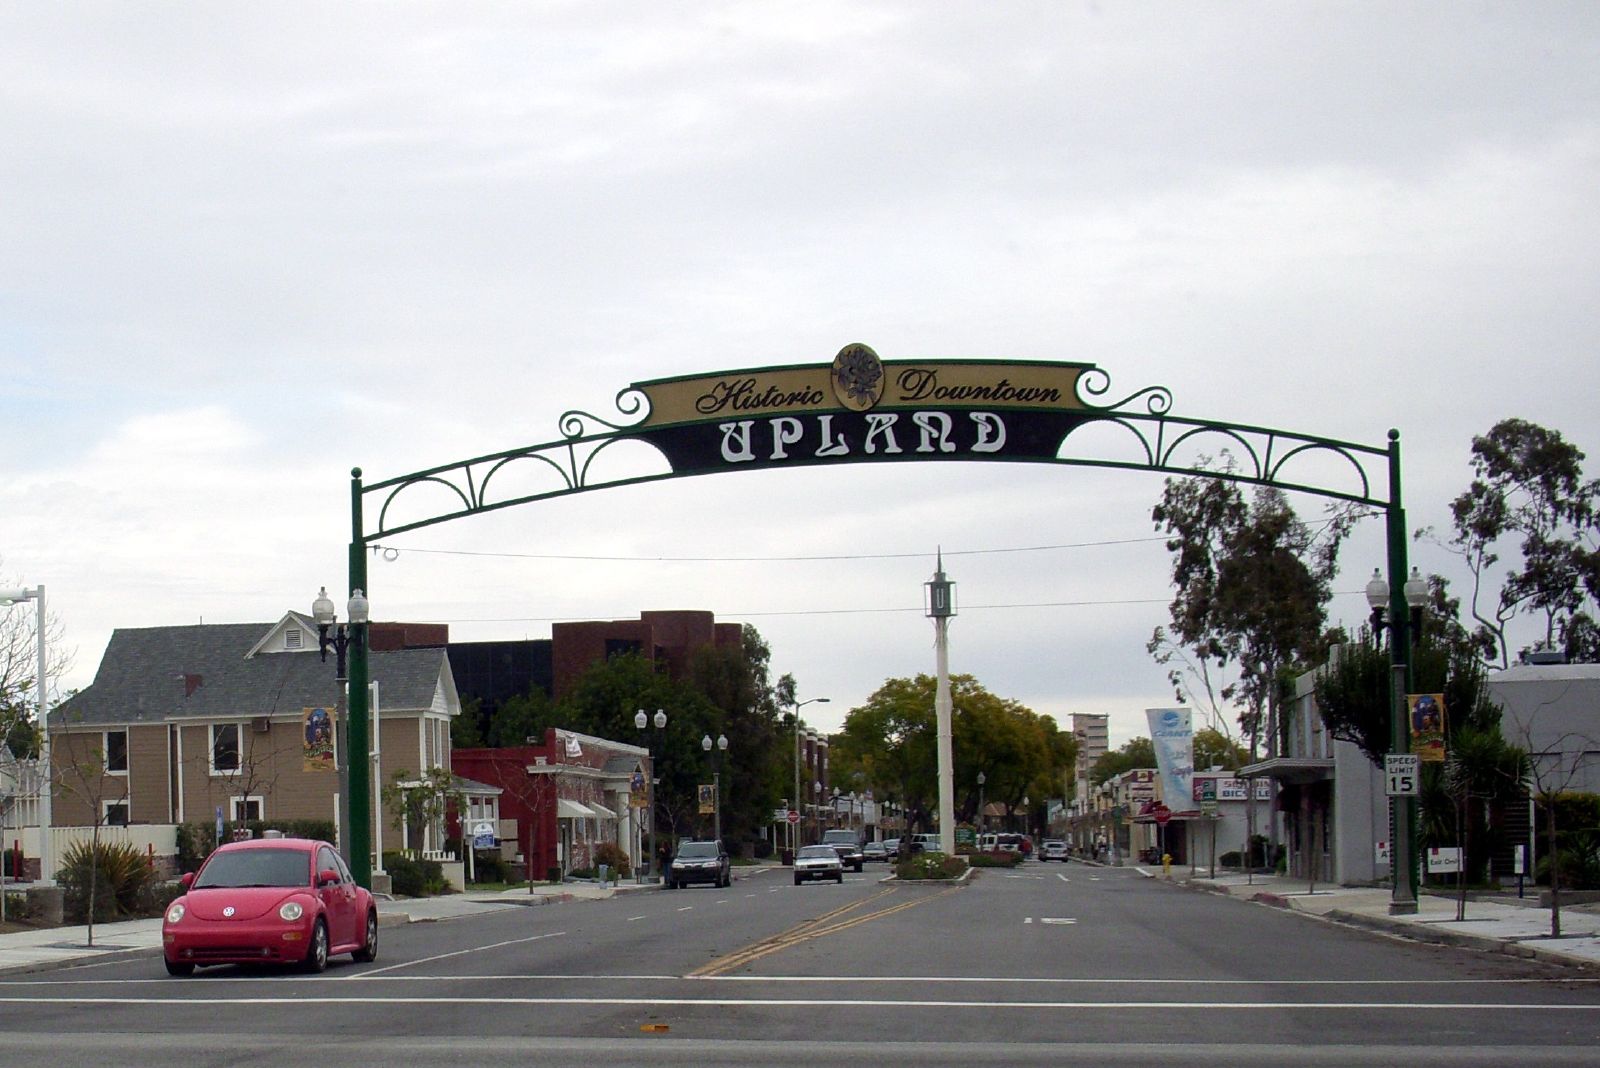 Historic Downtown Upland entrance signage over roadway.